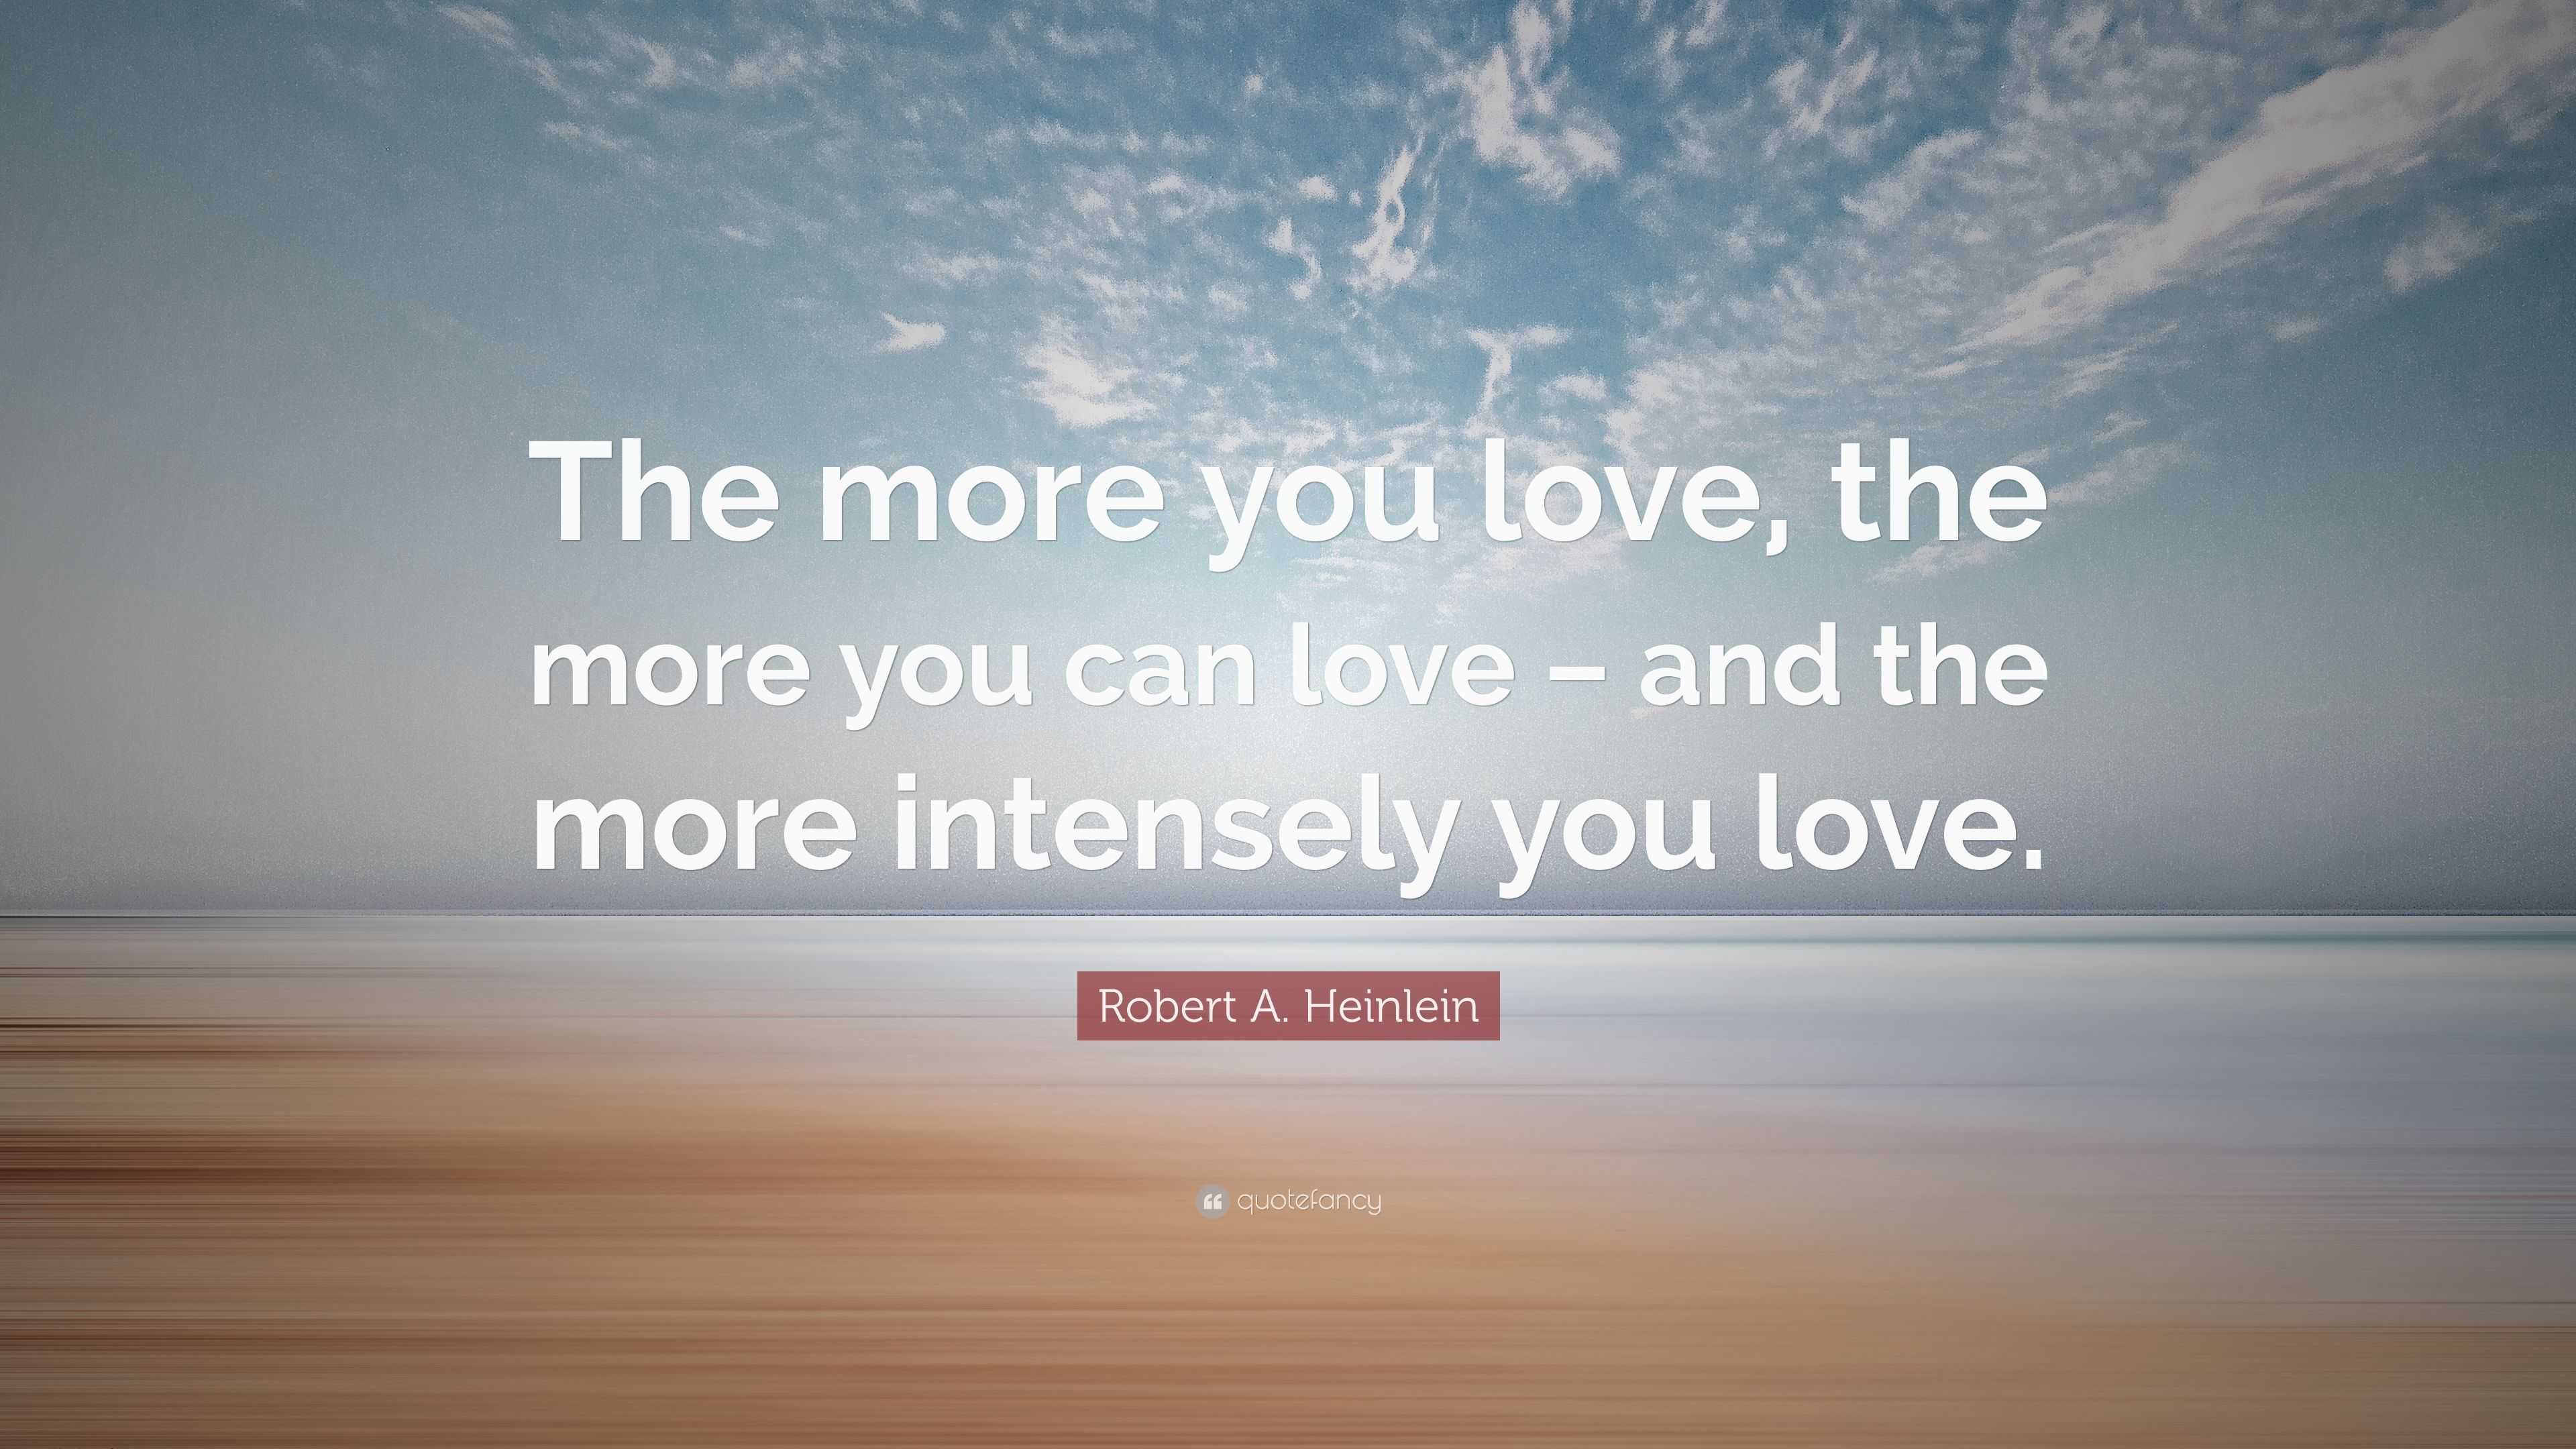 Robert A. Heinlein Quote: “The more you love, the more you can love ...